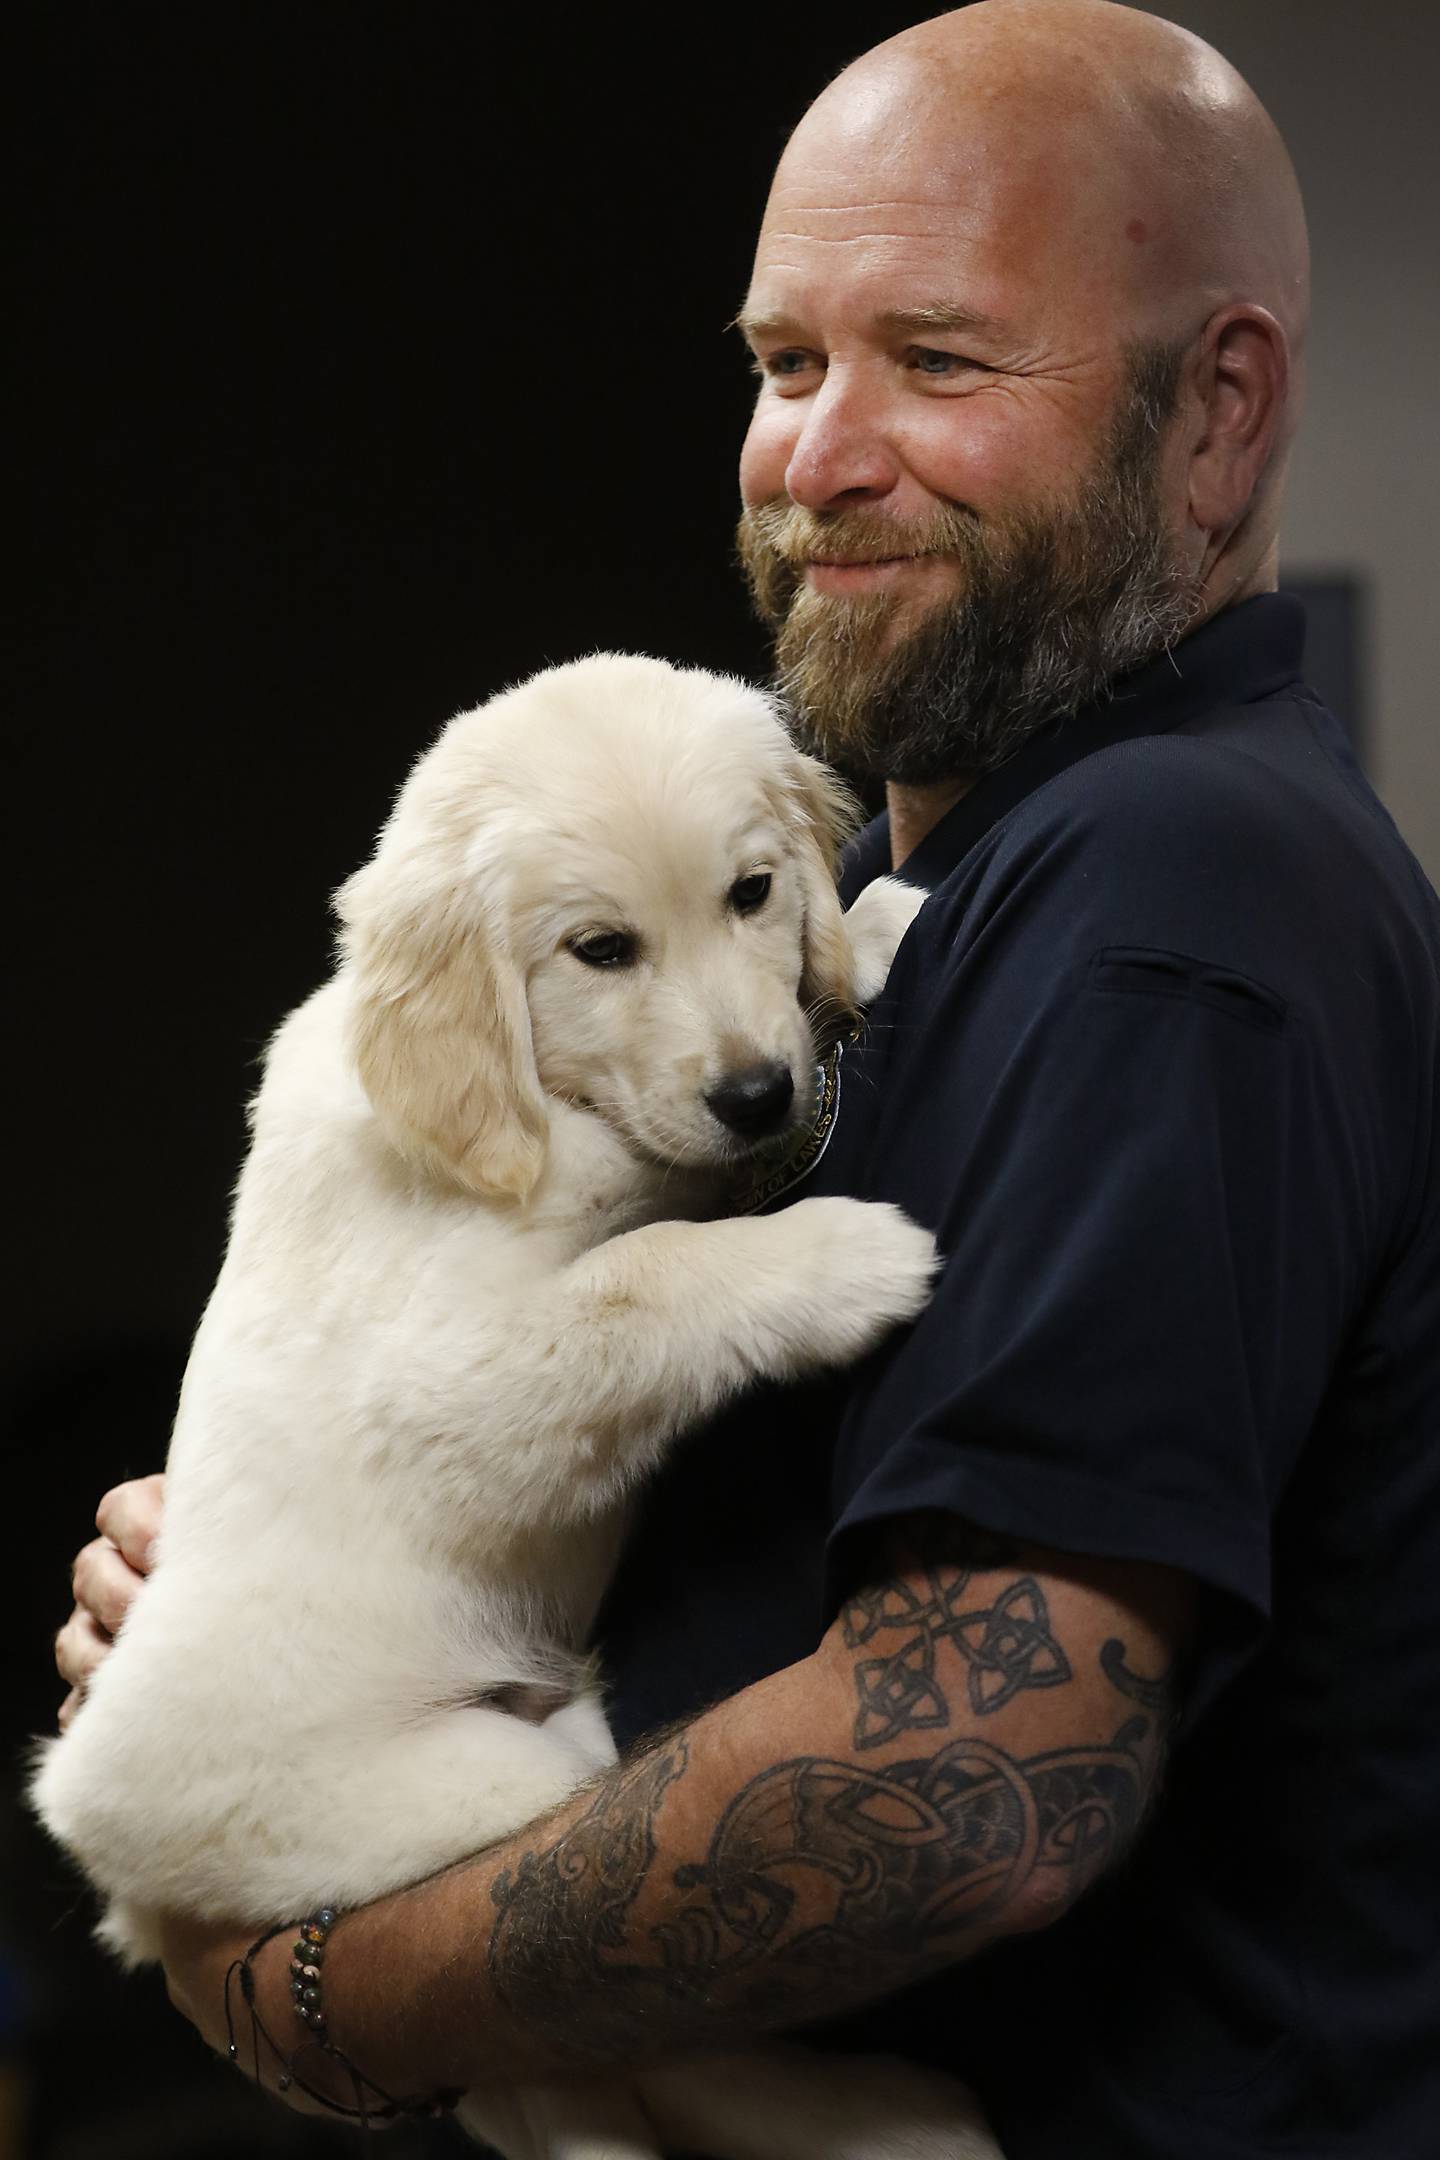 McHenry Police Department Social Services Coordinator Jason Sterwerf holds Oakley, the new McHenry Police Department therapy dog, Thursday, August 4, 2022, at the police department in McHenry.